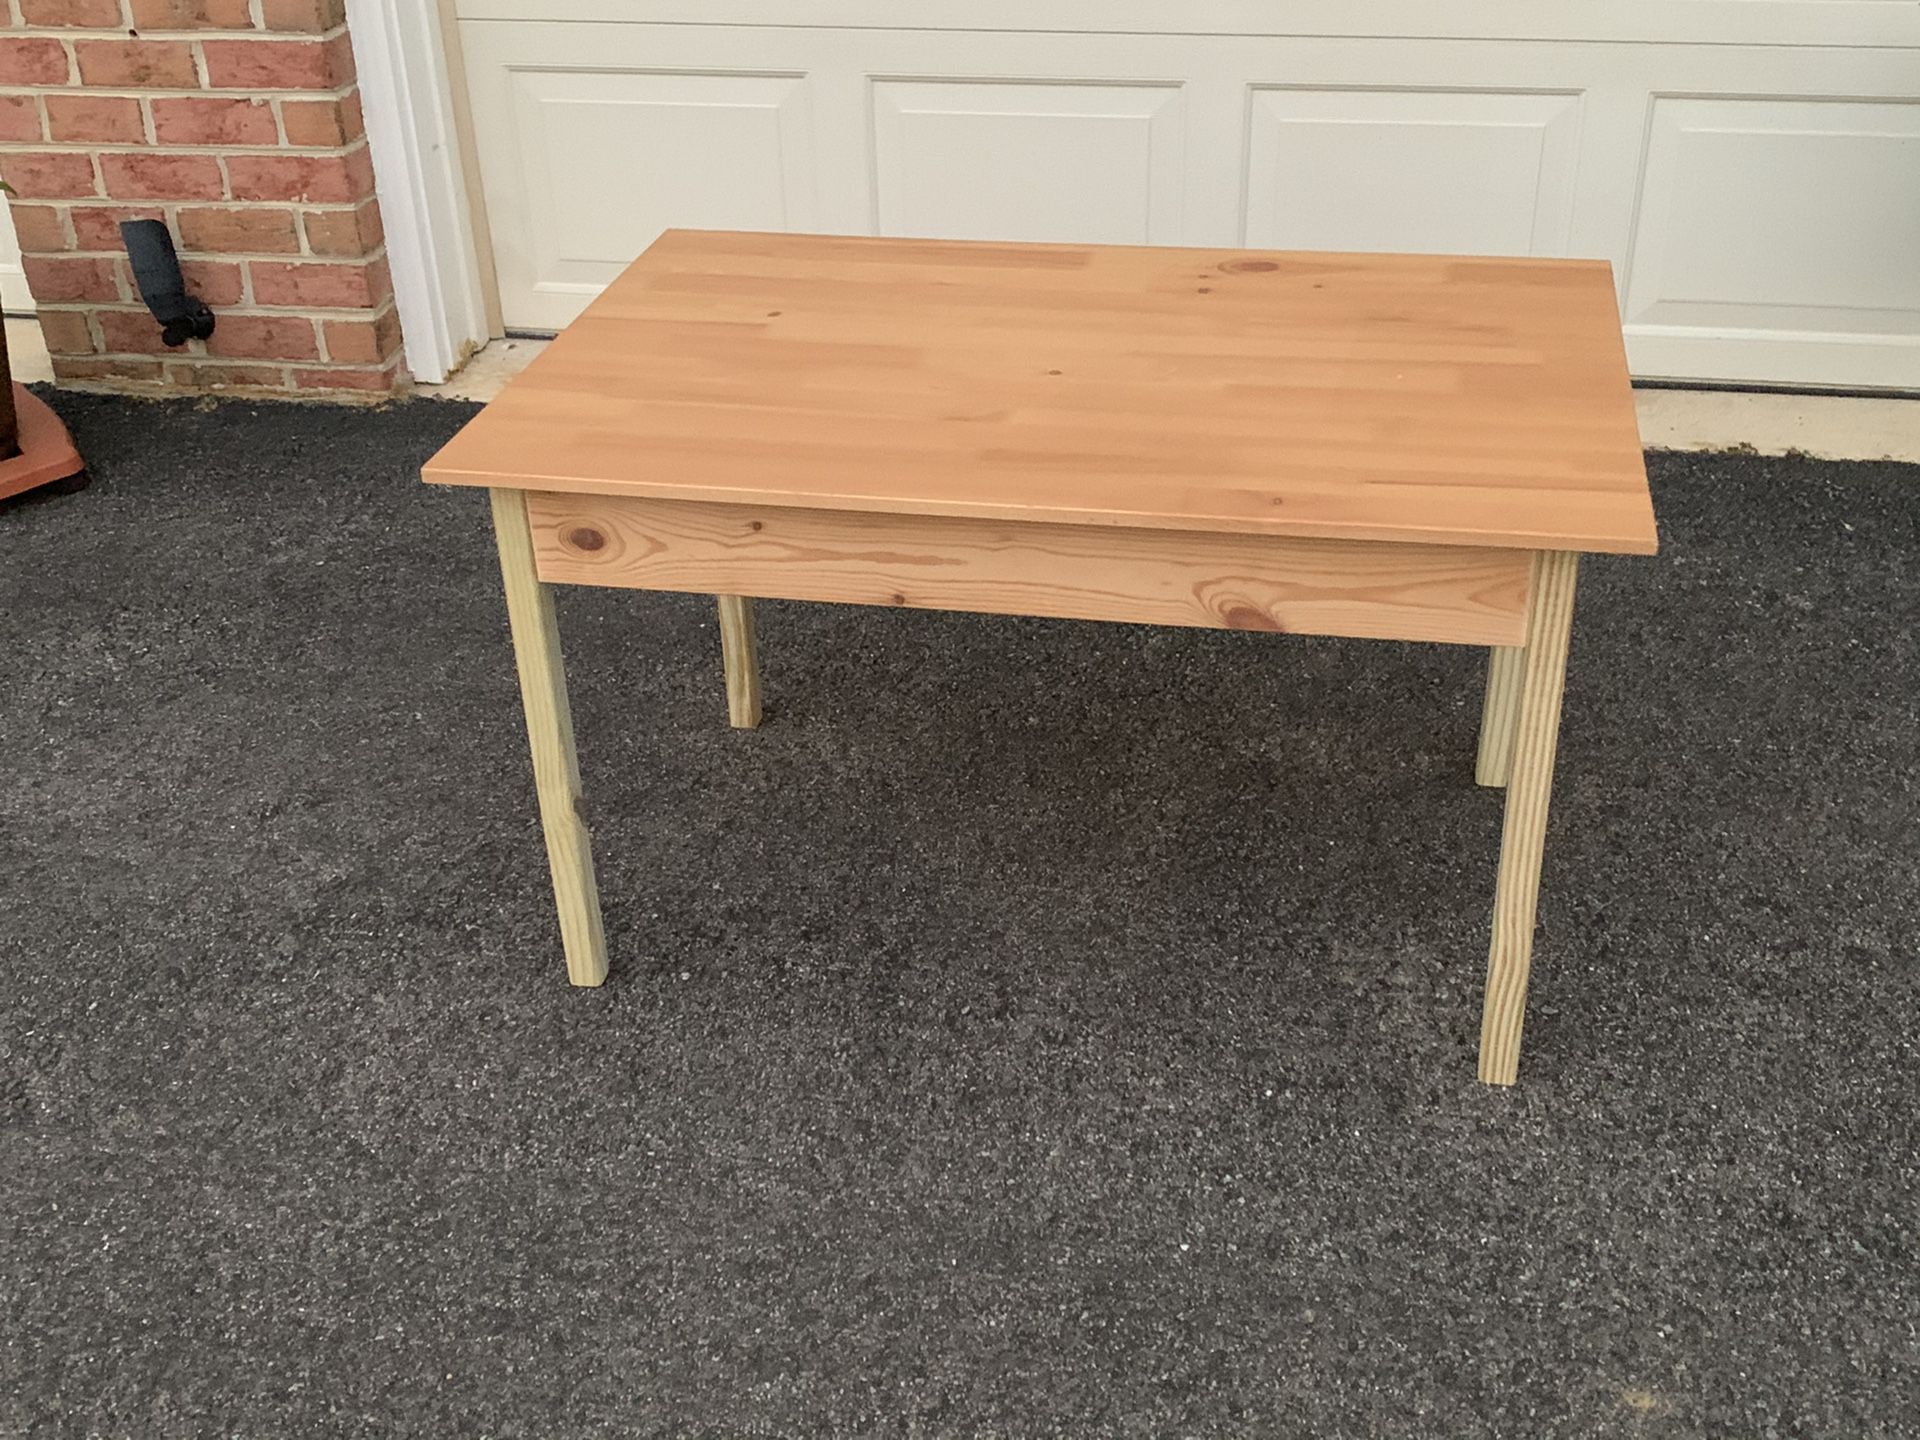 Small kids desk/play table with storage